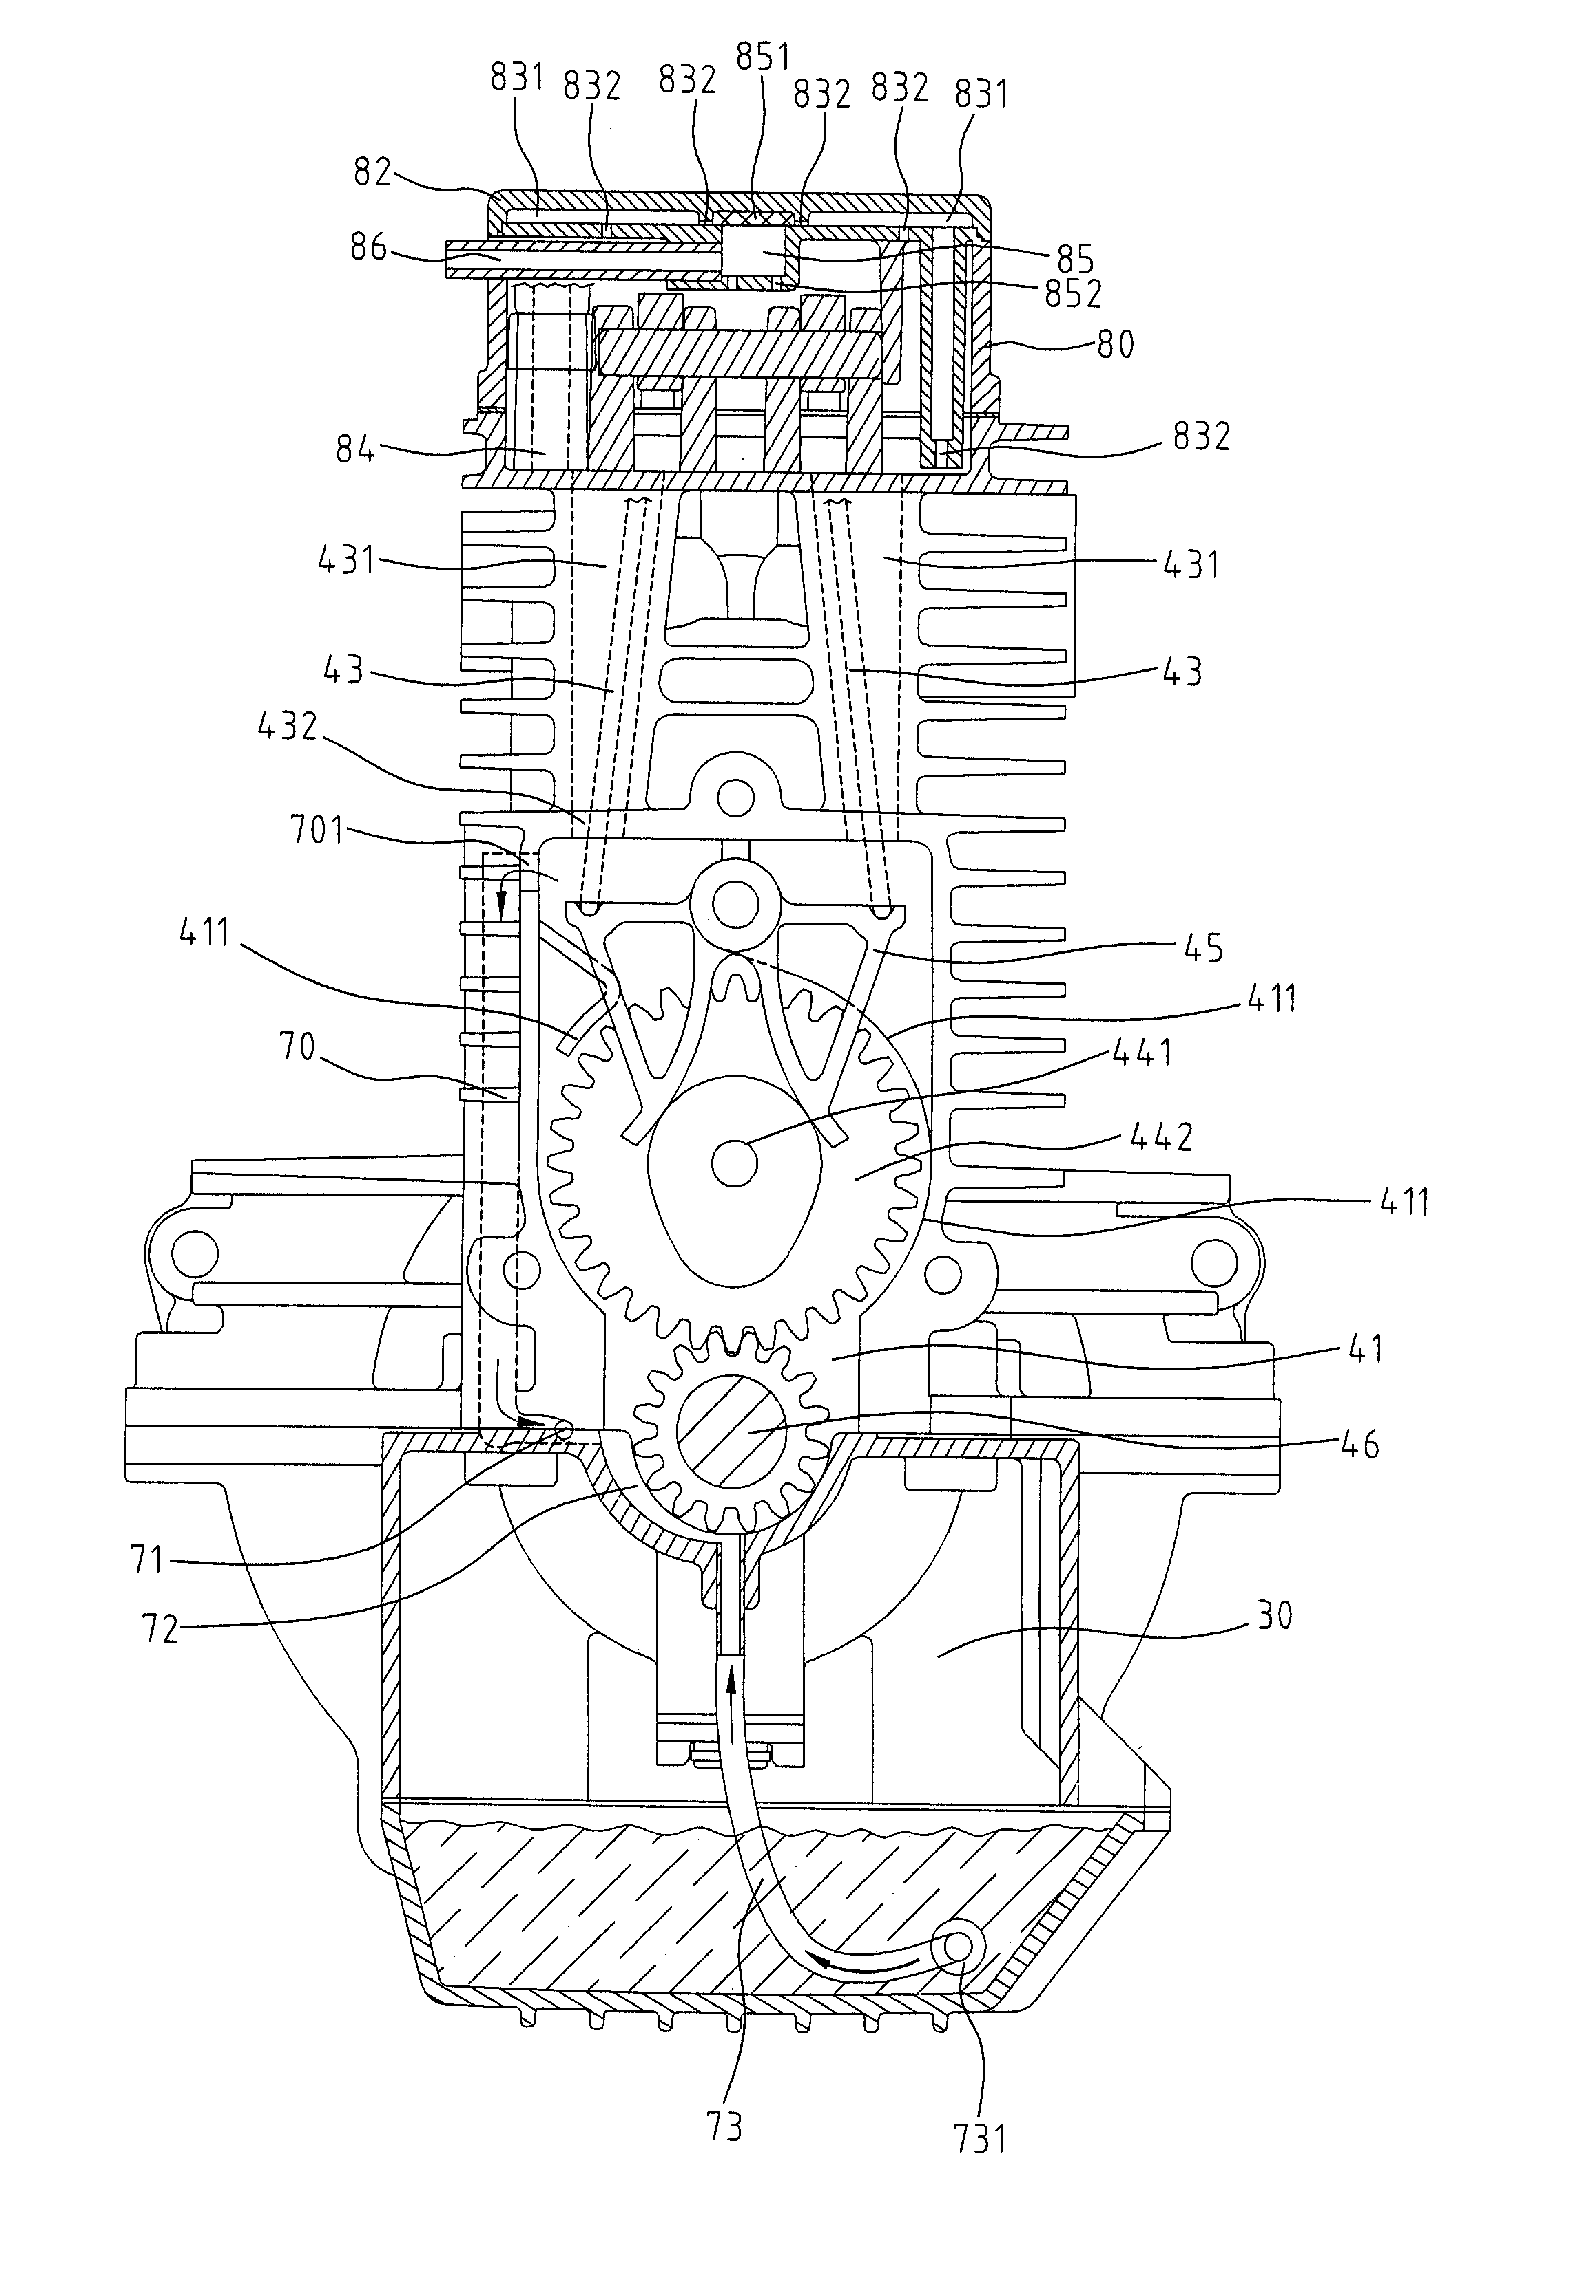 Lubrication system for an engine